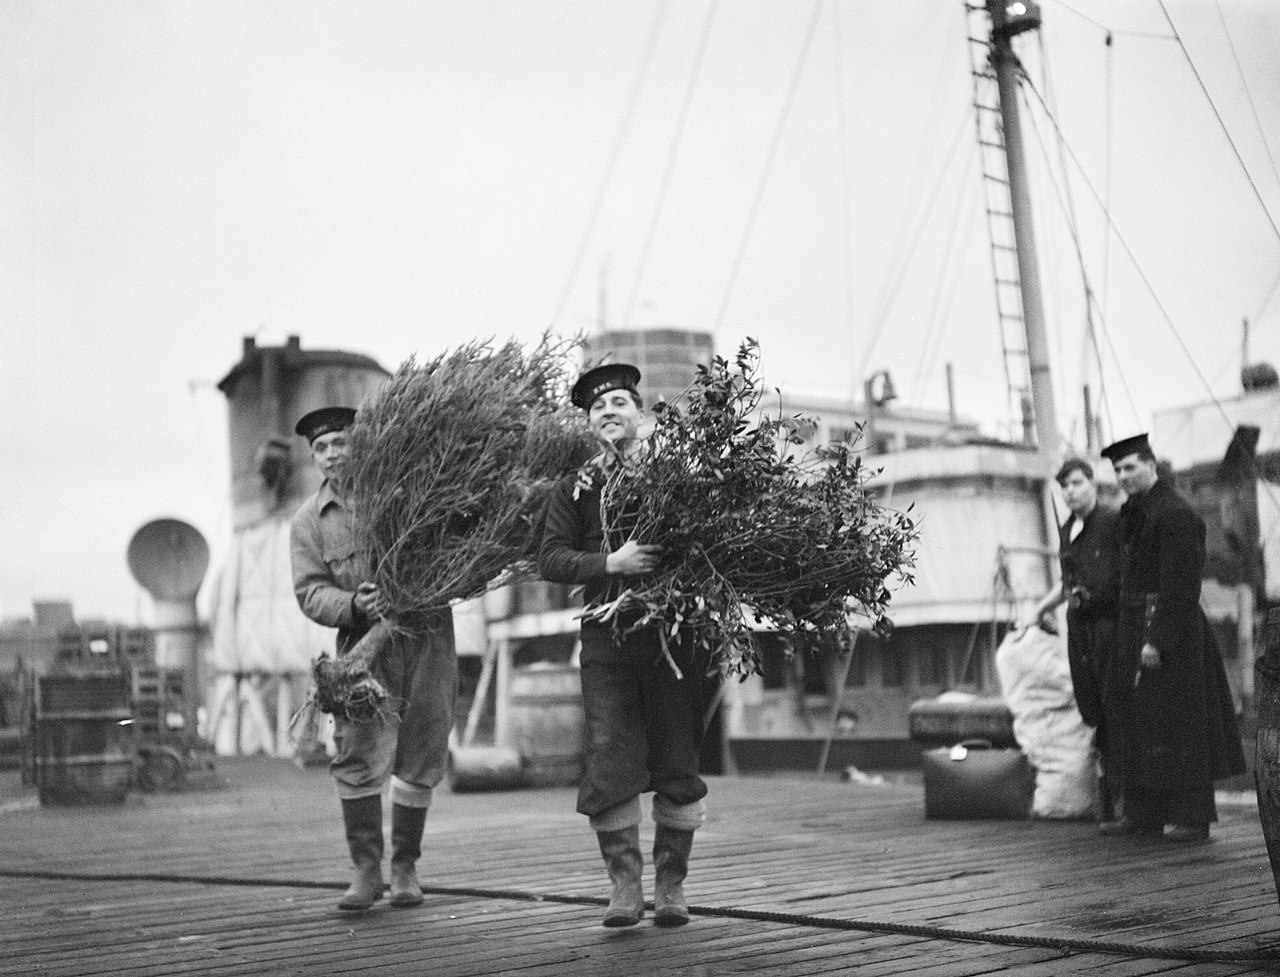 Sailors carrying the Christmas tree and holly for Christmas celebrations aboard a British ship, 1941.